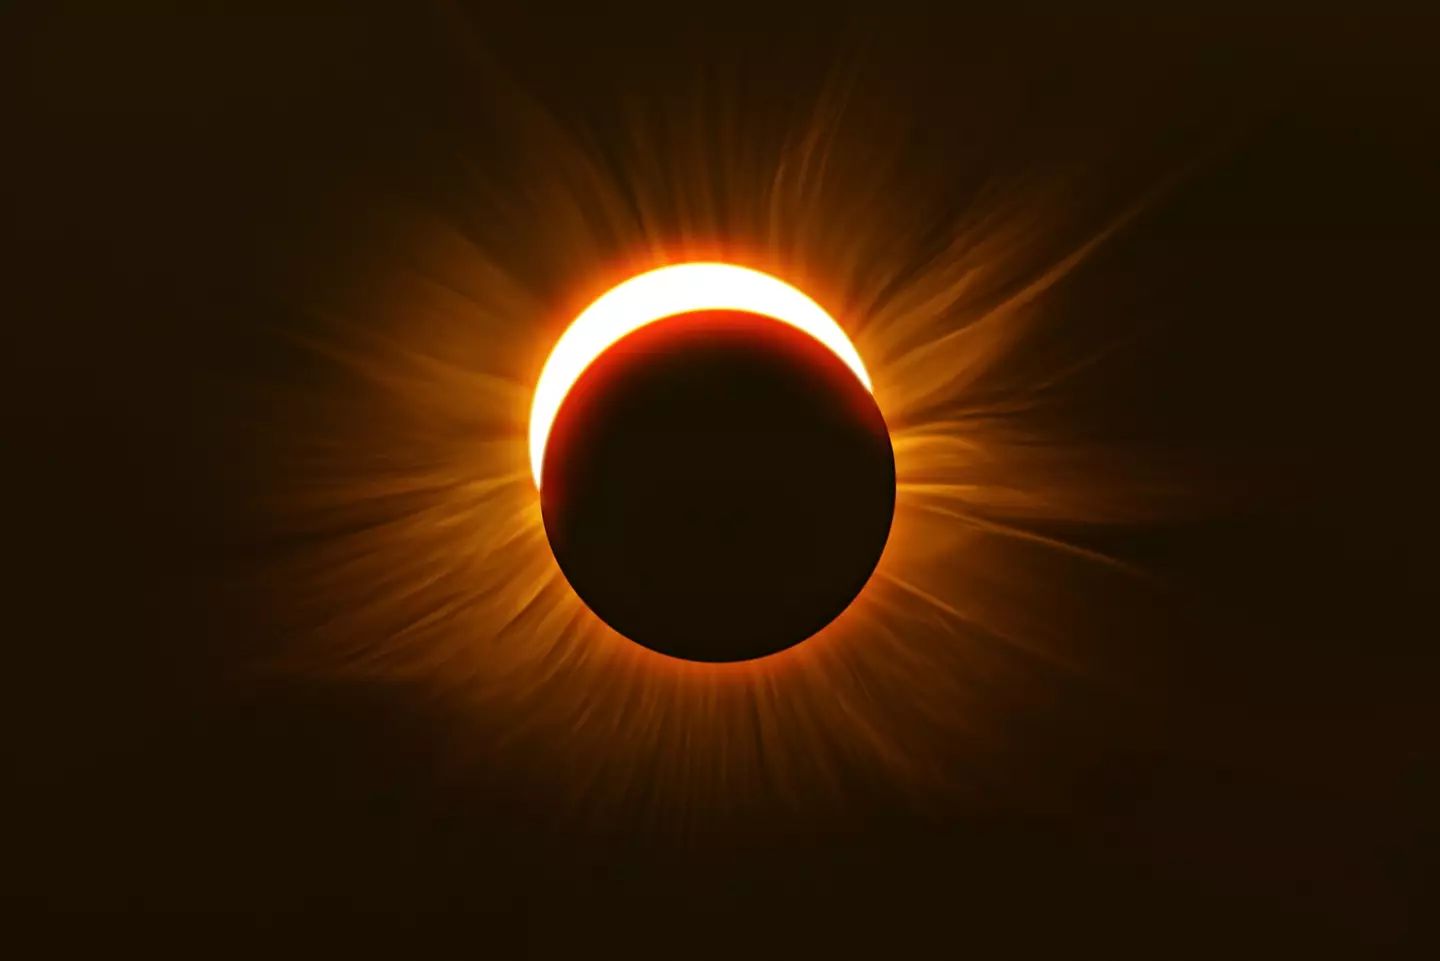 An eclipse as it happens. Getty Stock Image